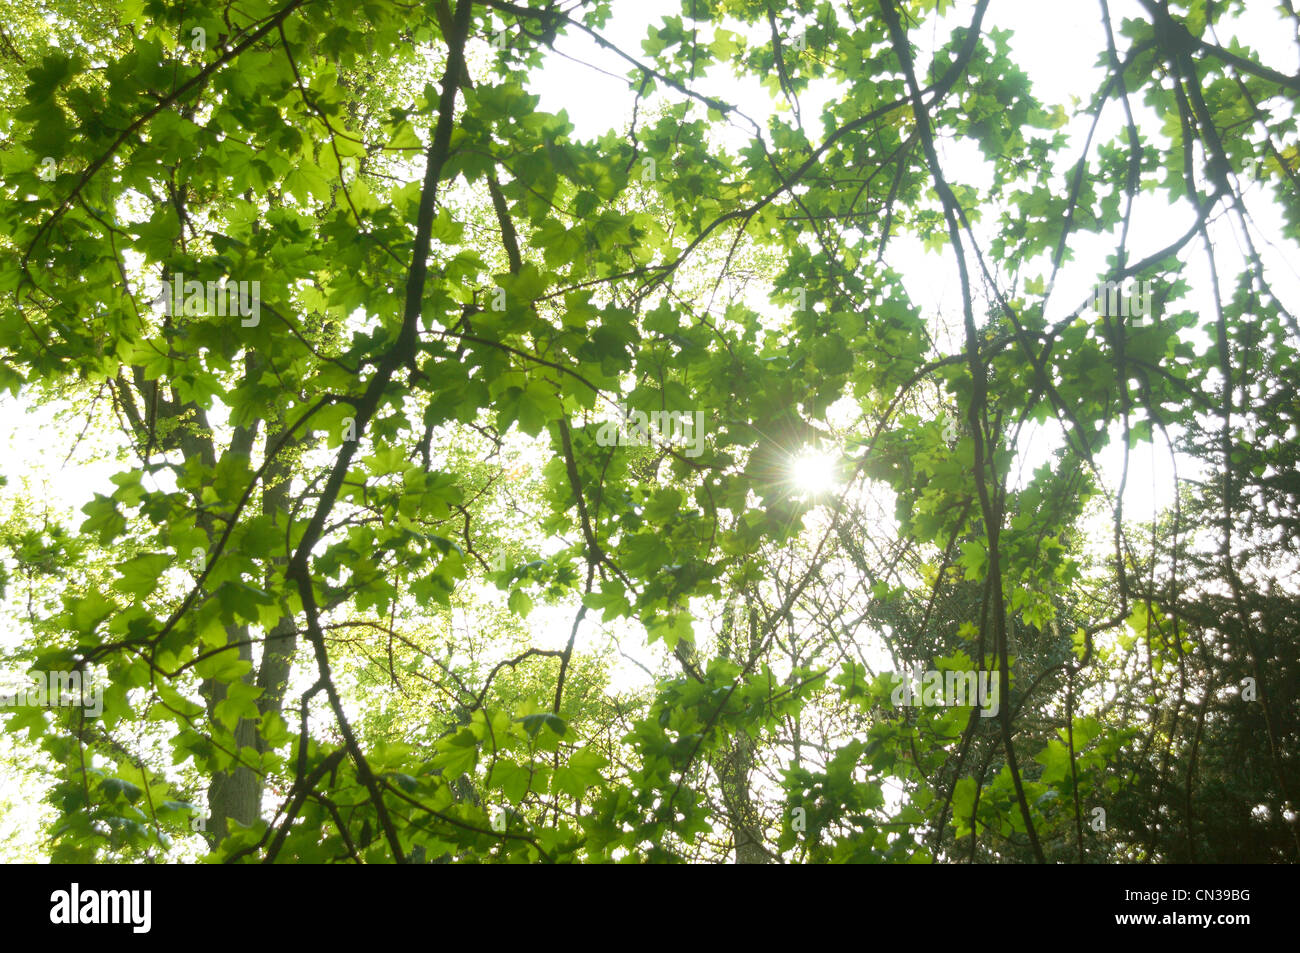 Sunlight coming through leaves of sycamore tree Stock Photo